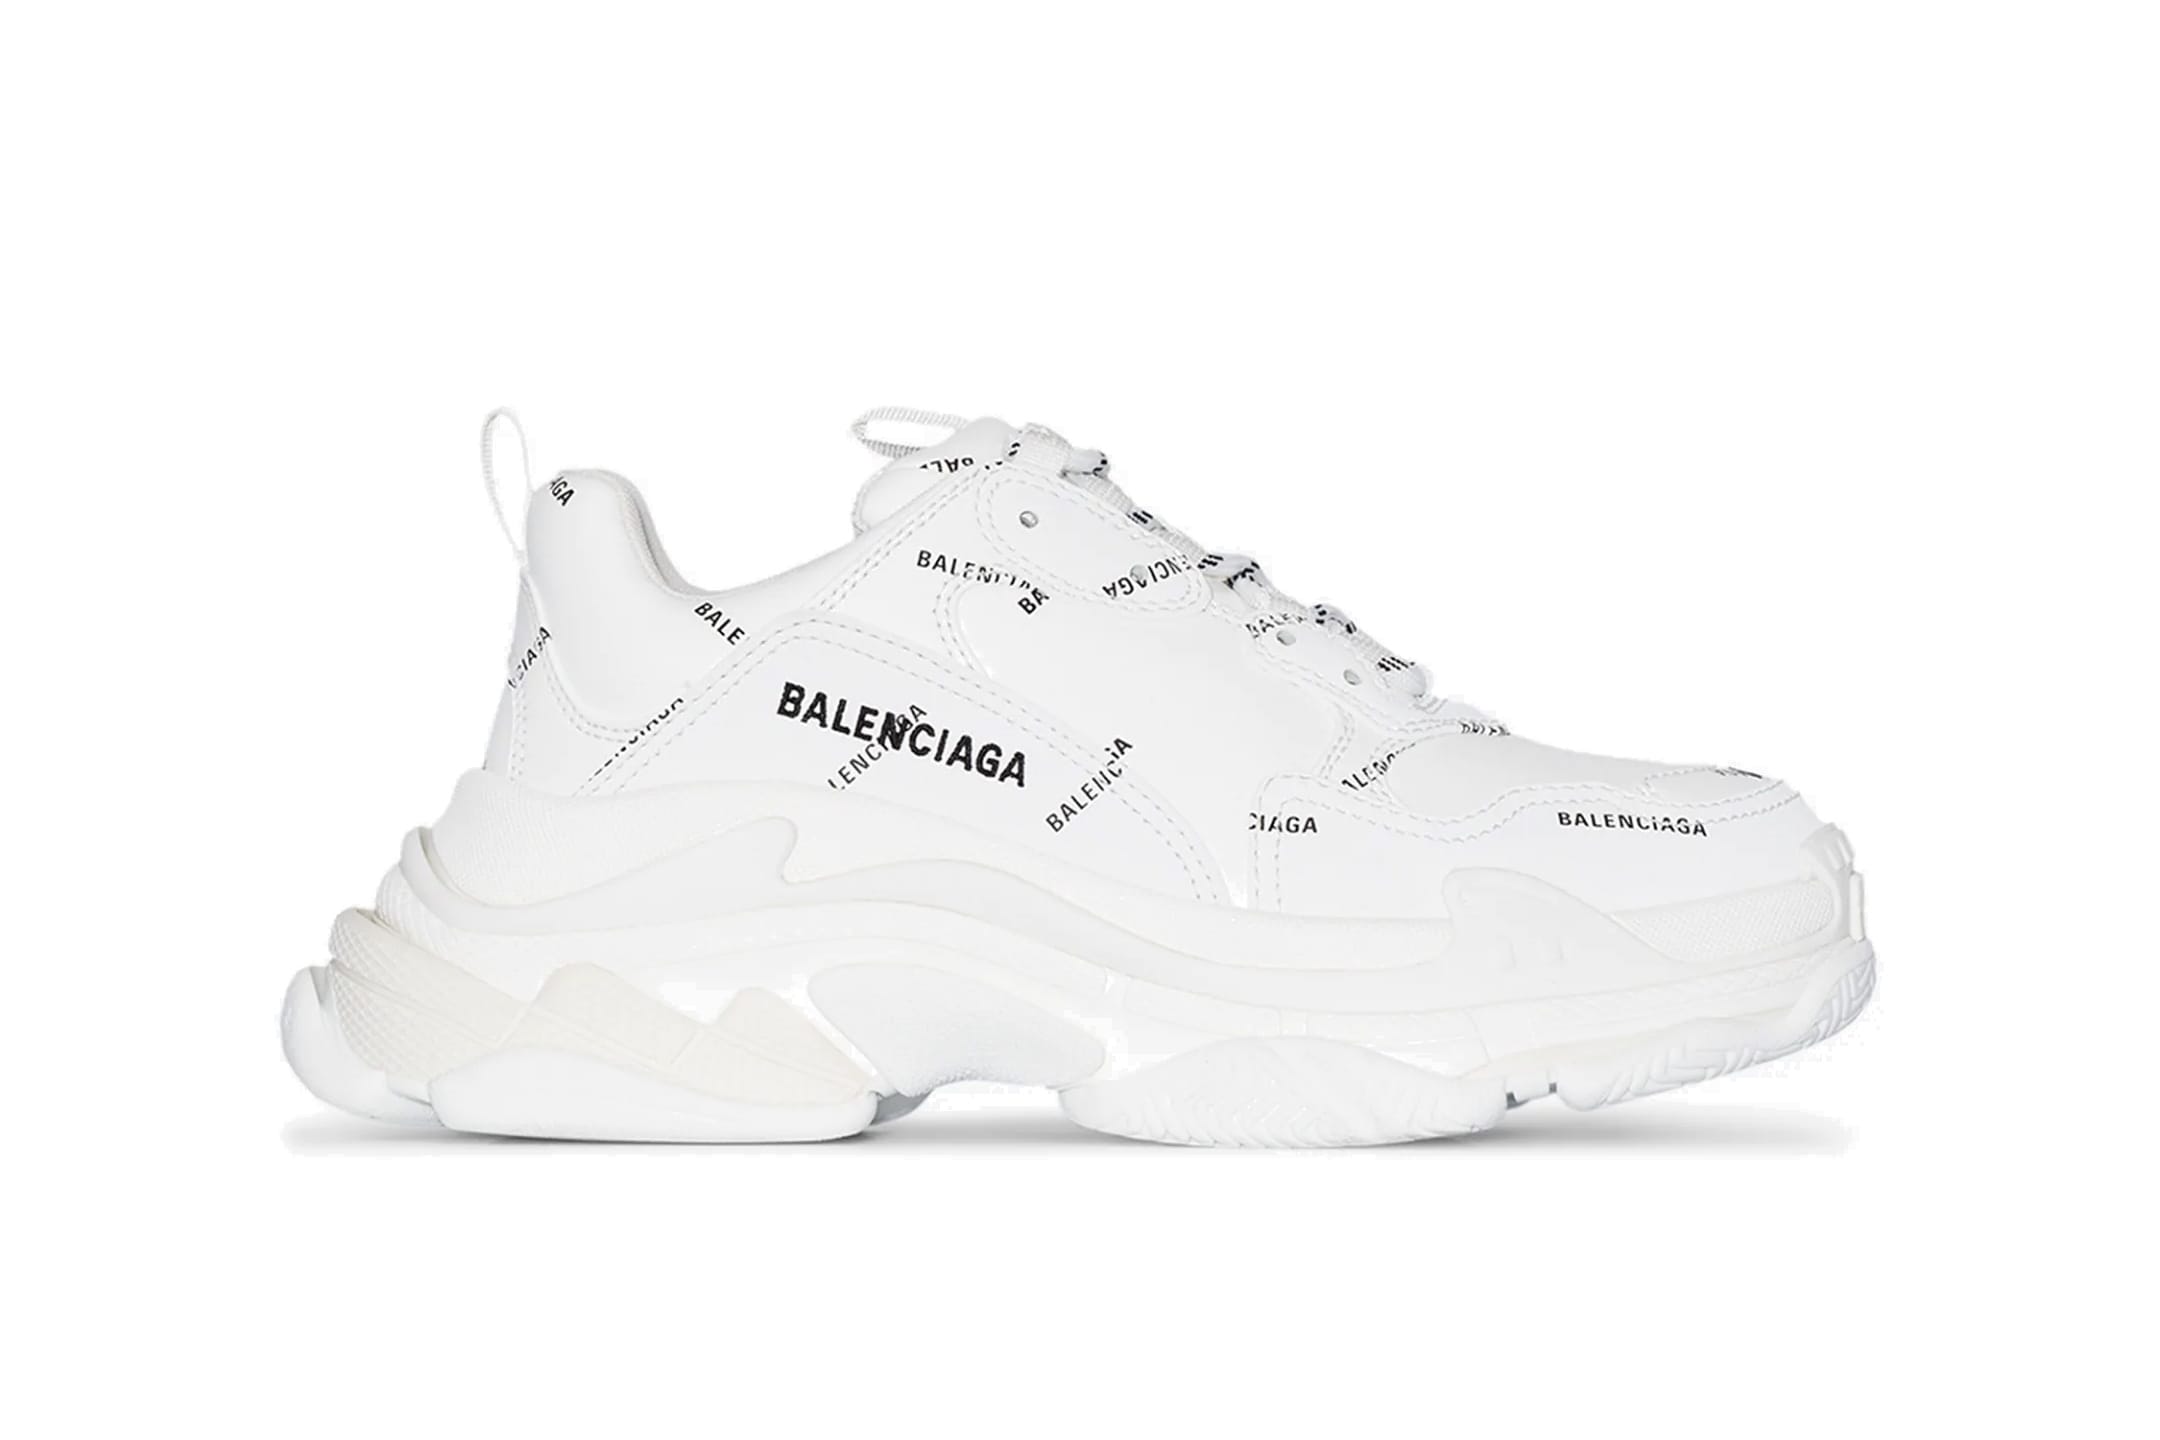 Buy cheap Balenciaga Triple S Trainers RED Black at online